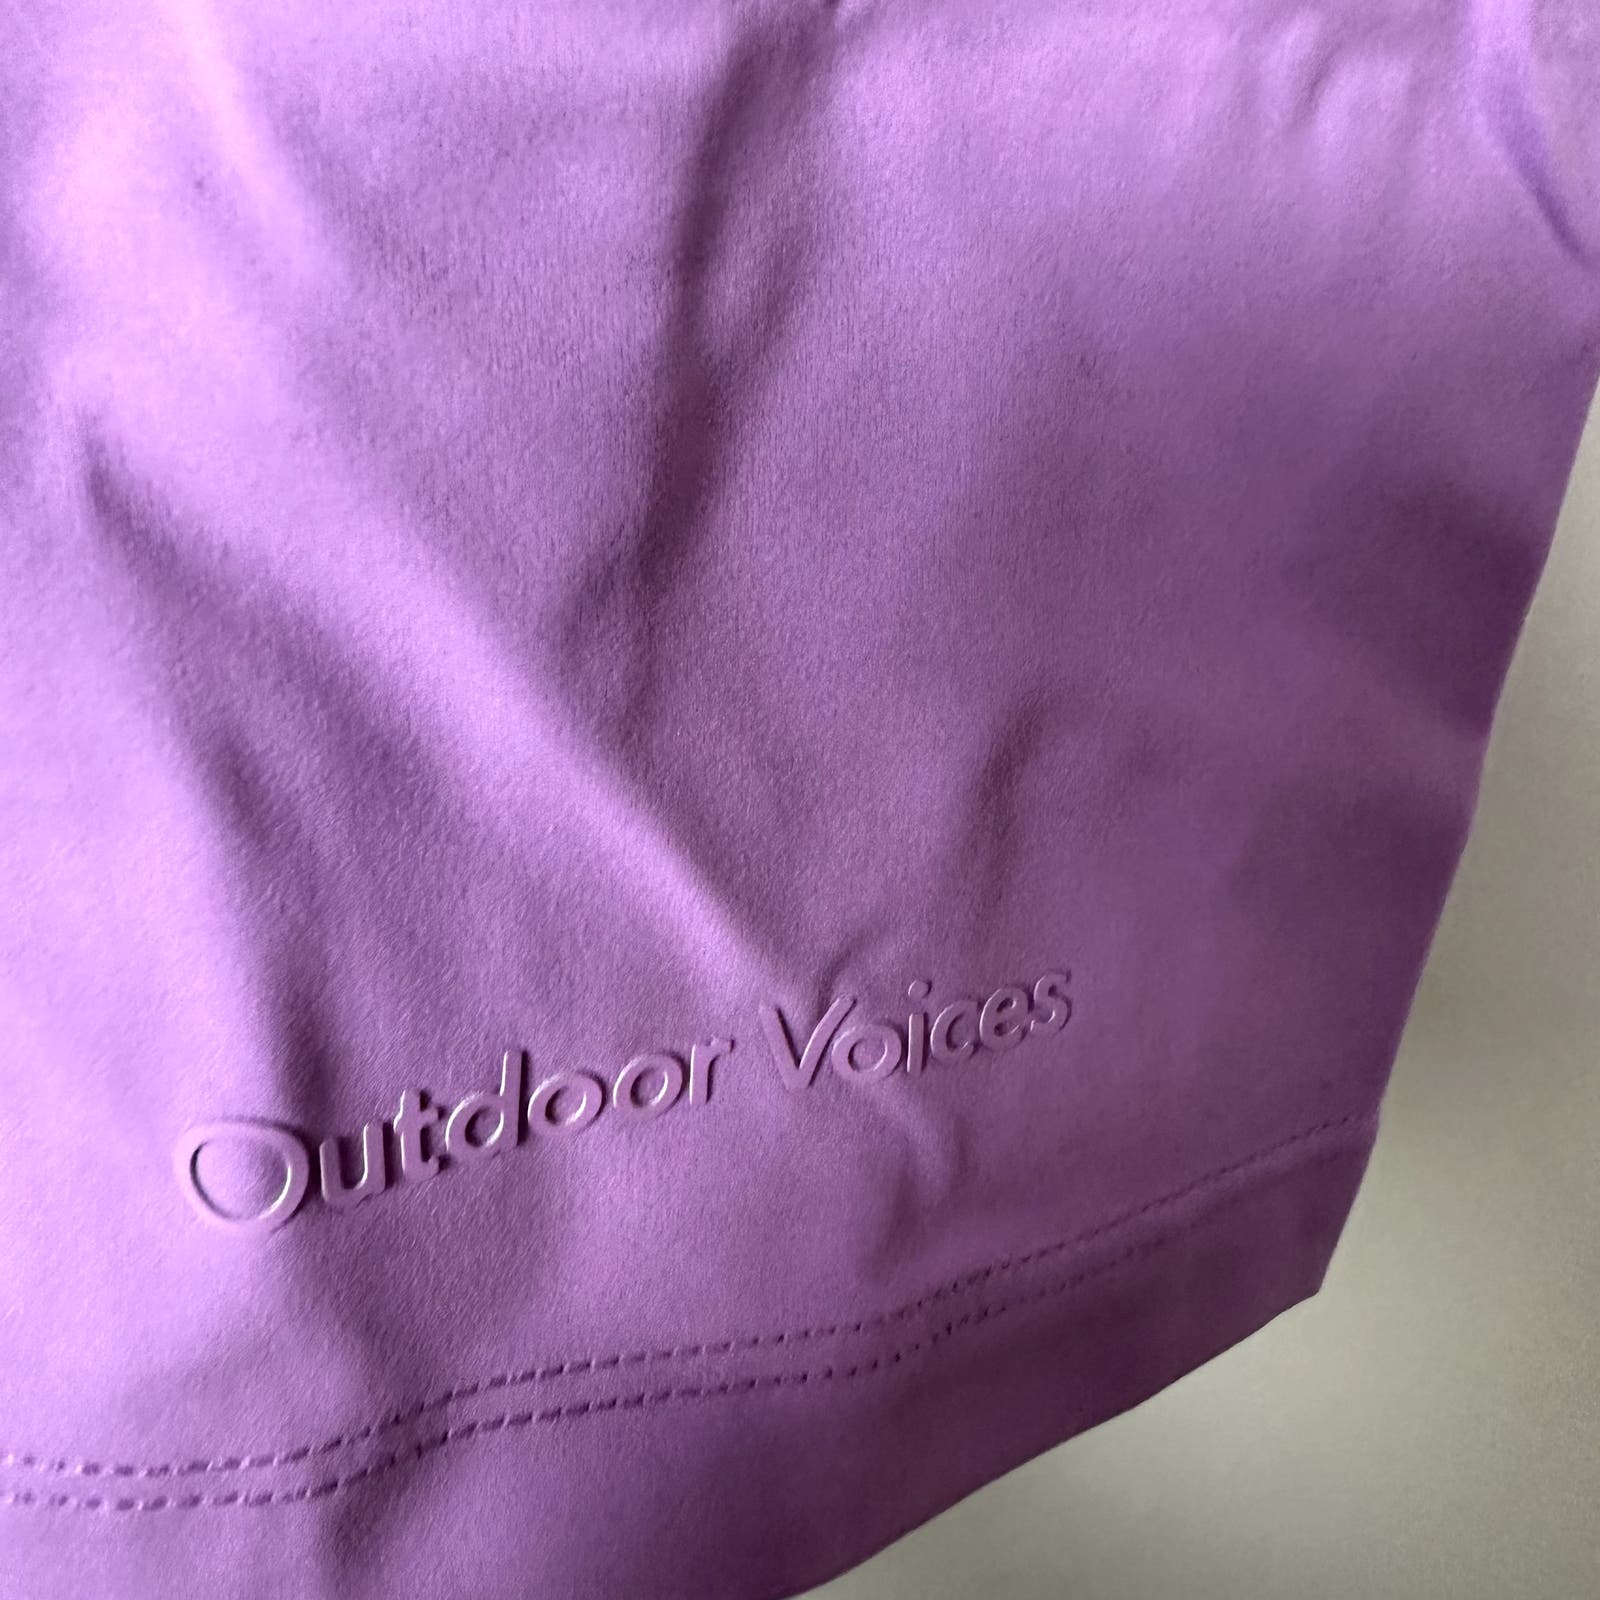 Outdoor Voices NWT One Shoulder Dress Lined Lavender Size Large